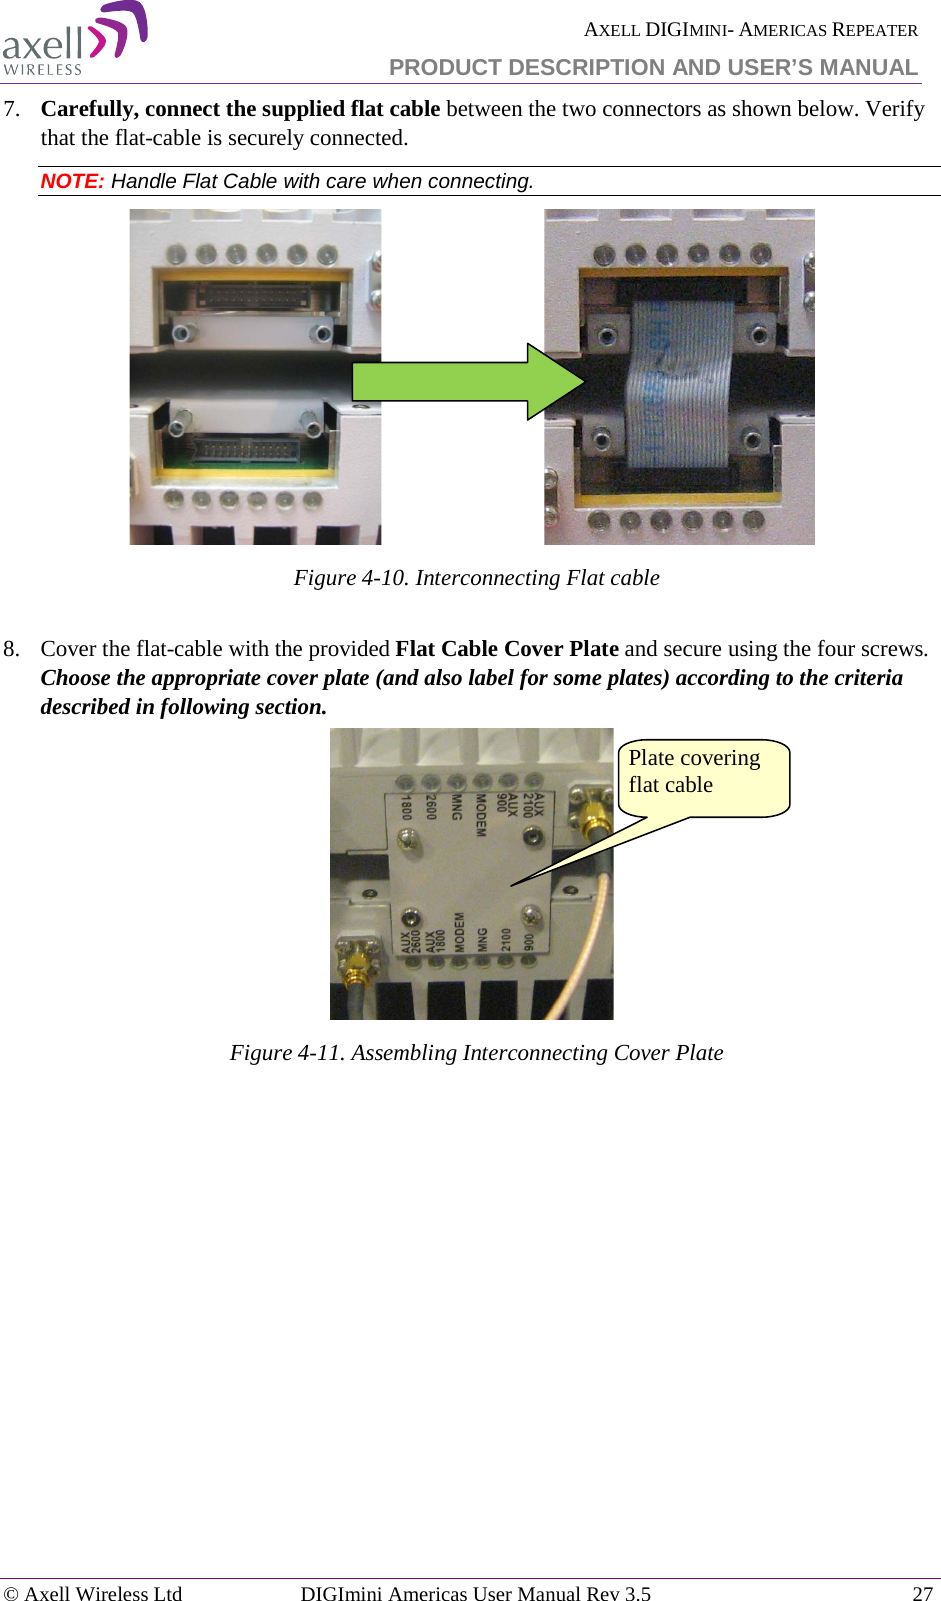  AXELL DIGIMINI- AMERICAS REPEATER PRODUCT DESCRIPTION AND USER’S MANUAL © Axell Wireless Ltd DIGImini Americas User Manual Rev 3.5  27  7.  Carefully, connect the supplied flat cable between the two connectors as shown below. Verify that the flat-cable is securely connected. NOTE: Handle Flat Cable with care when connecting.                               Figure  4-10. Interconnecting Flat cable  8.  Cover the flat-cable with the provided Flat Cable Cover Plate and secure using the four screws. Choose the appropriate cover plate (and also label for some plates) according to the criteria described in following section.  Figure  4-11. Assembling Interconnecting Cover Plate  Plate covering flat cable 